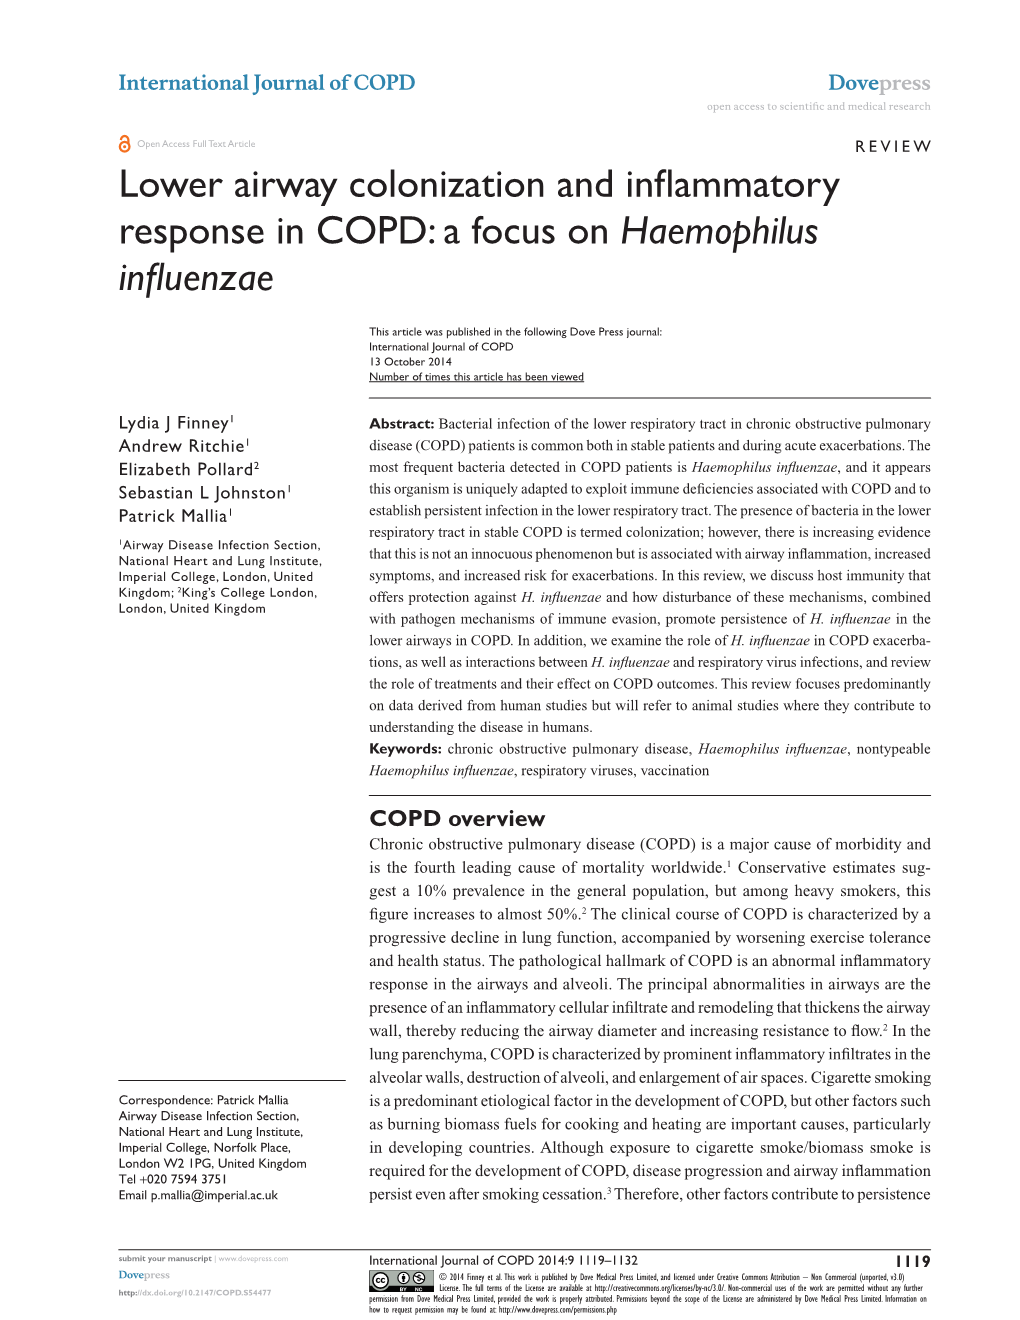 Lower Airway Colonization and Inflammatory Response in COPD: a Focus on Haemophilus Influenzae